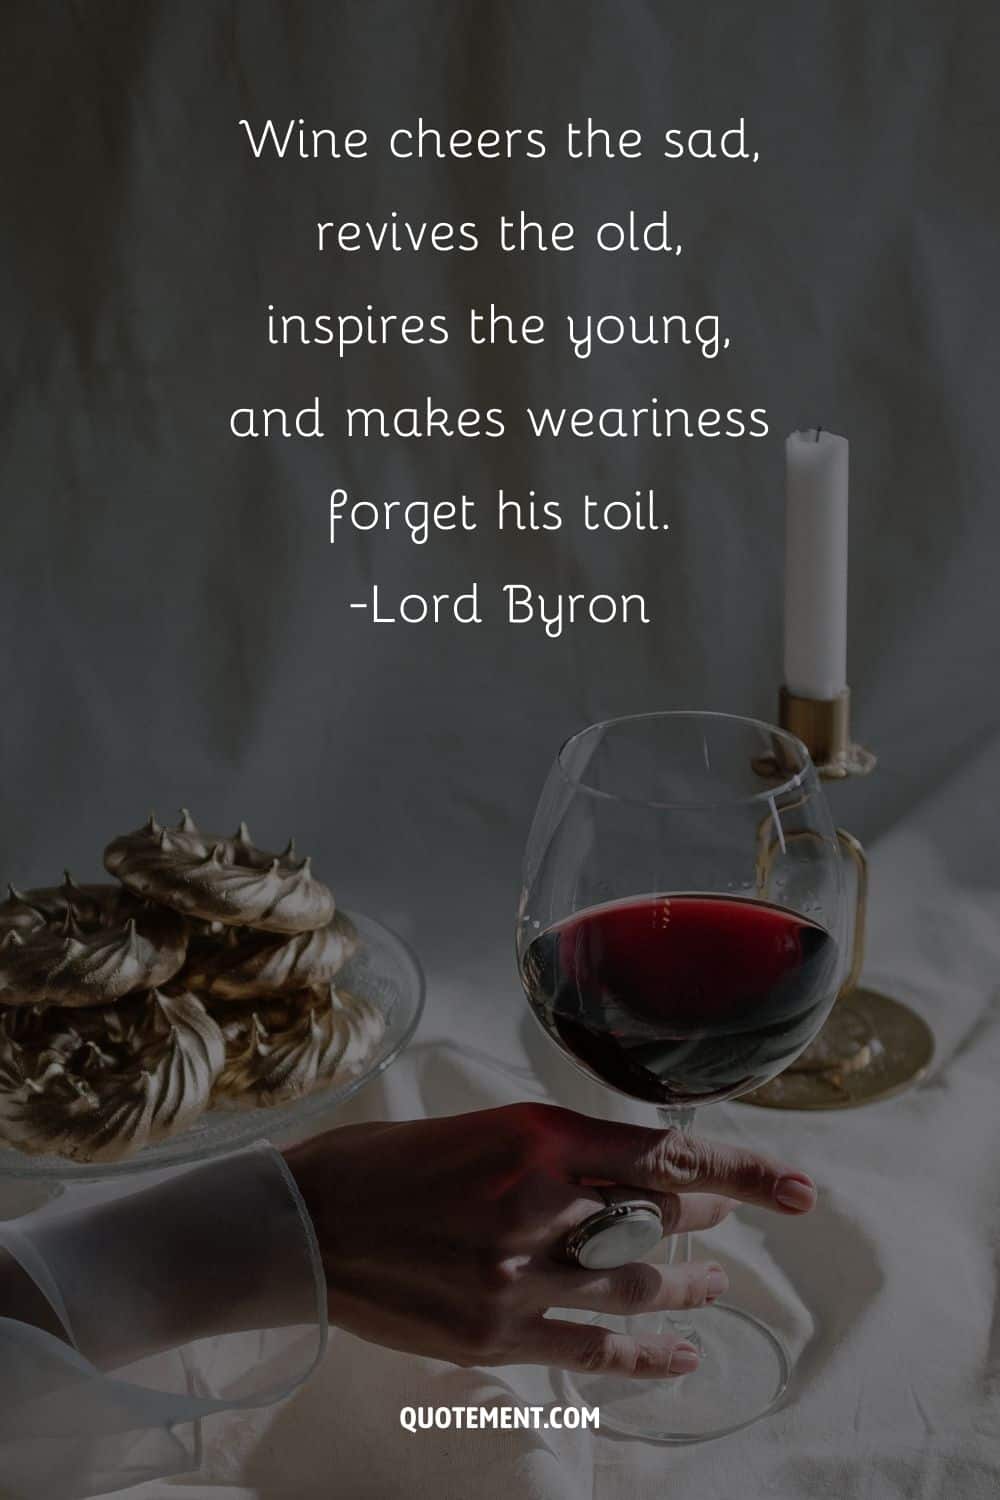 a woman wining and dining image inspirational wine drinking quote